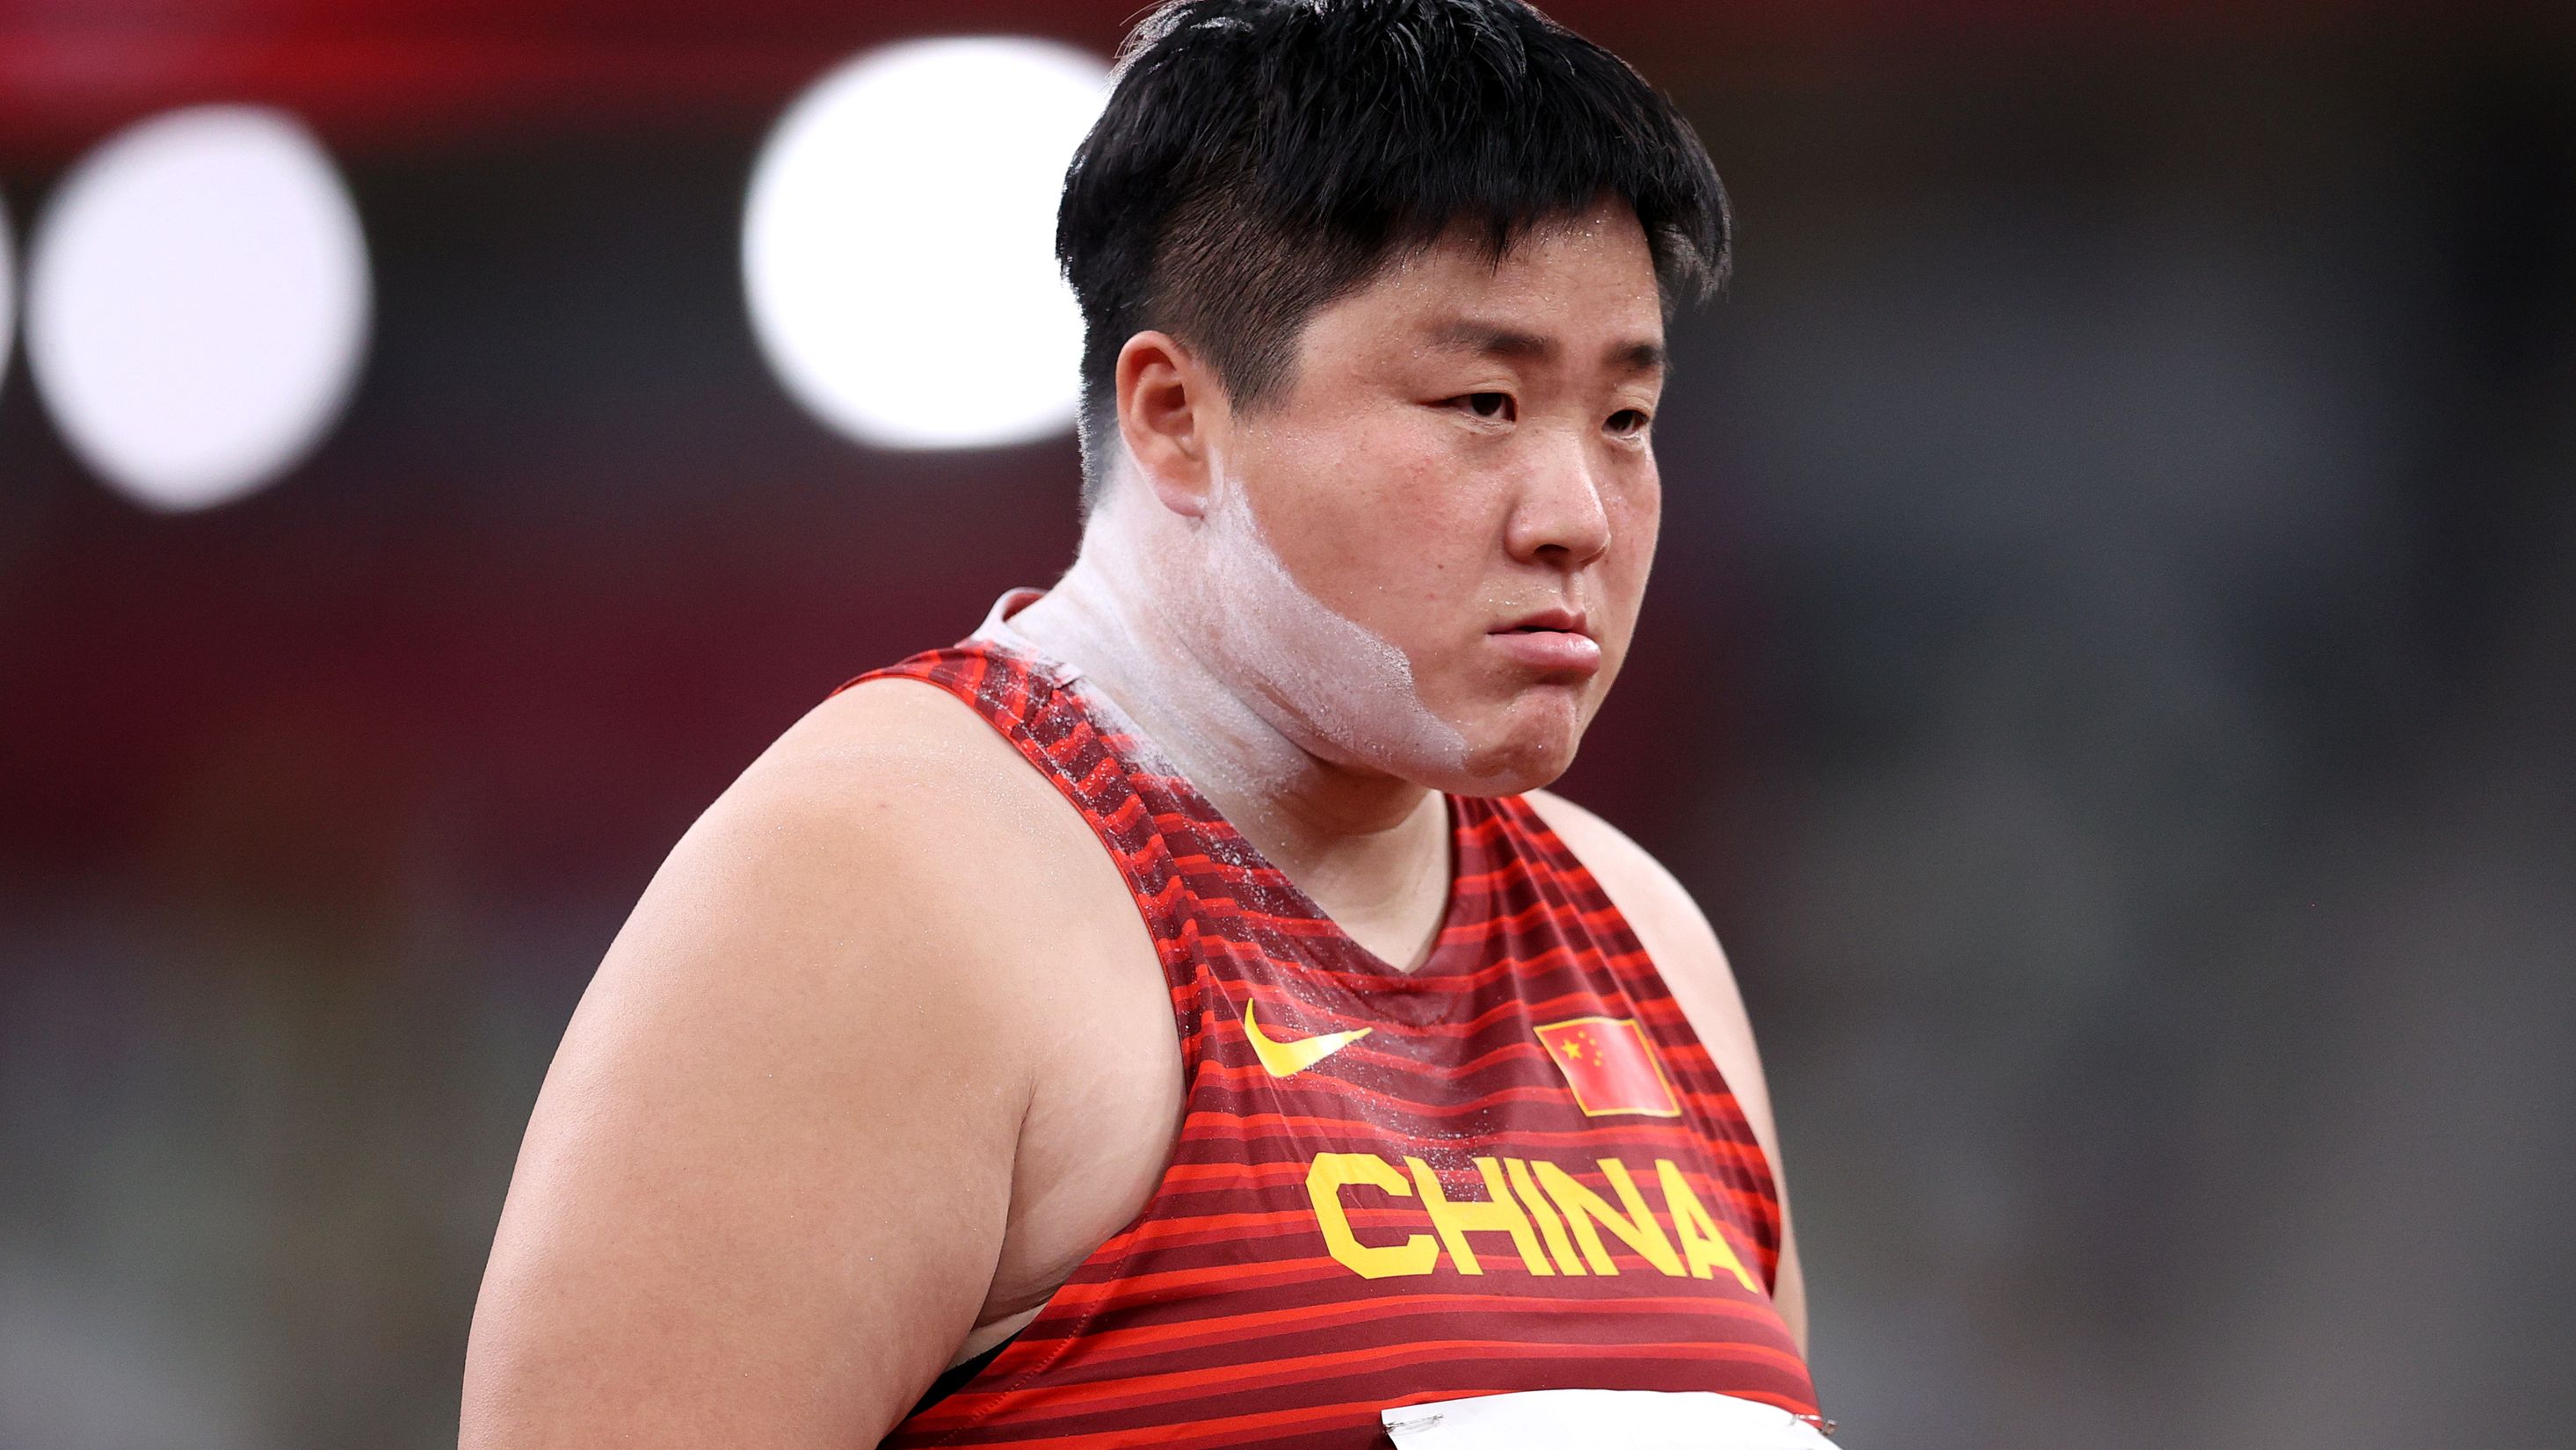 China athlete's interview angers viewers